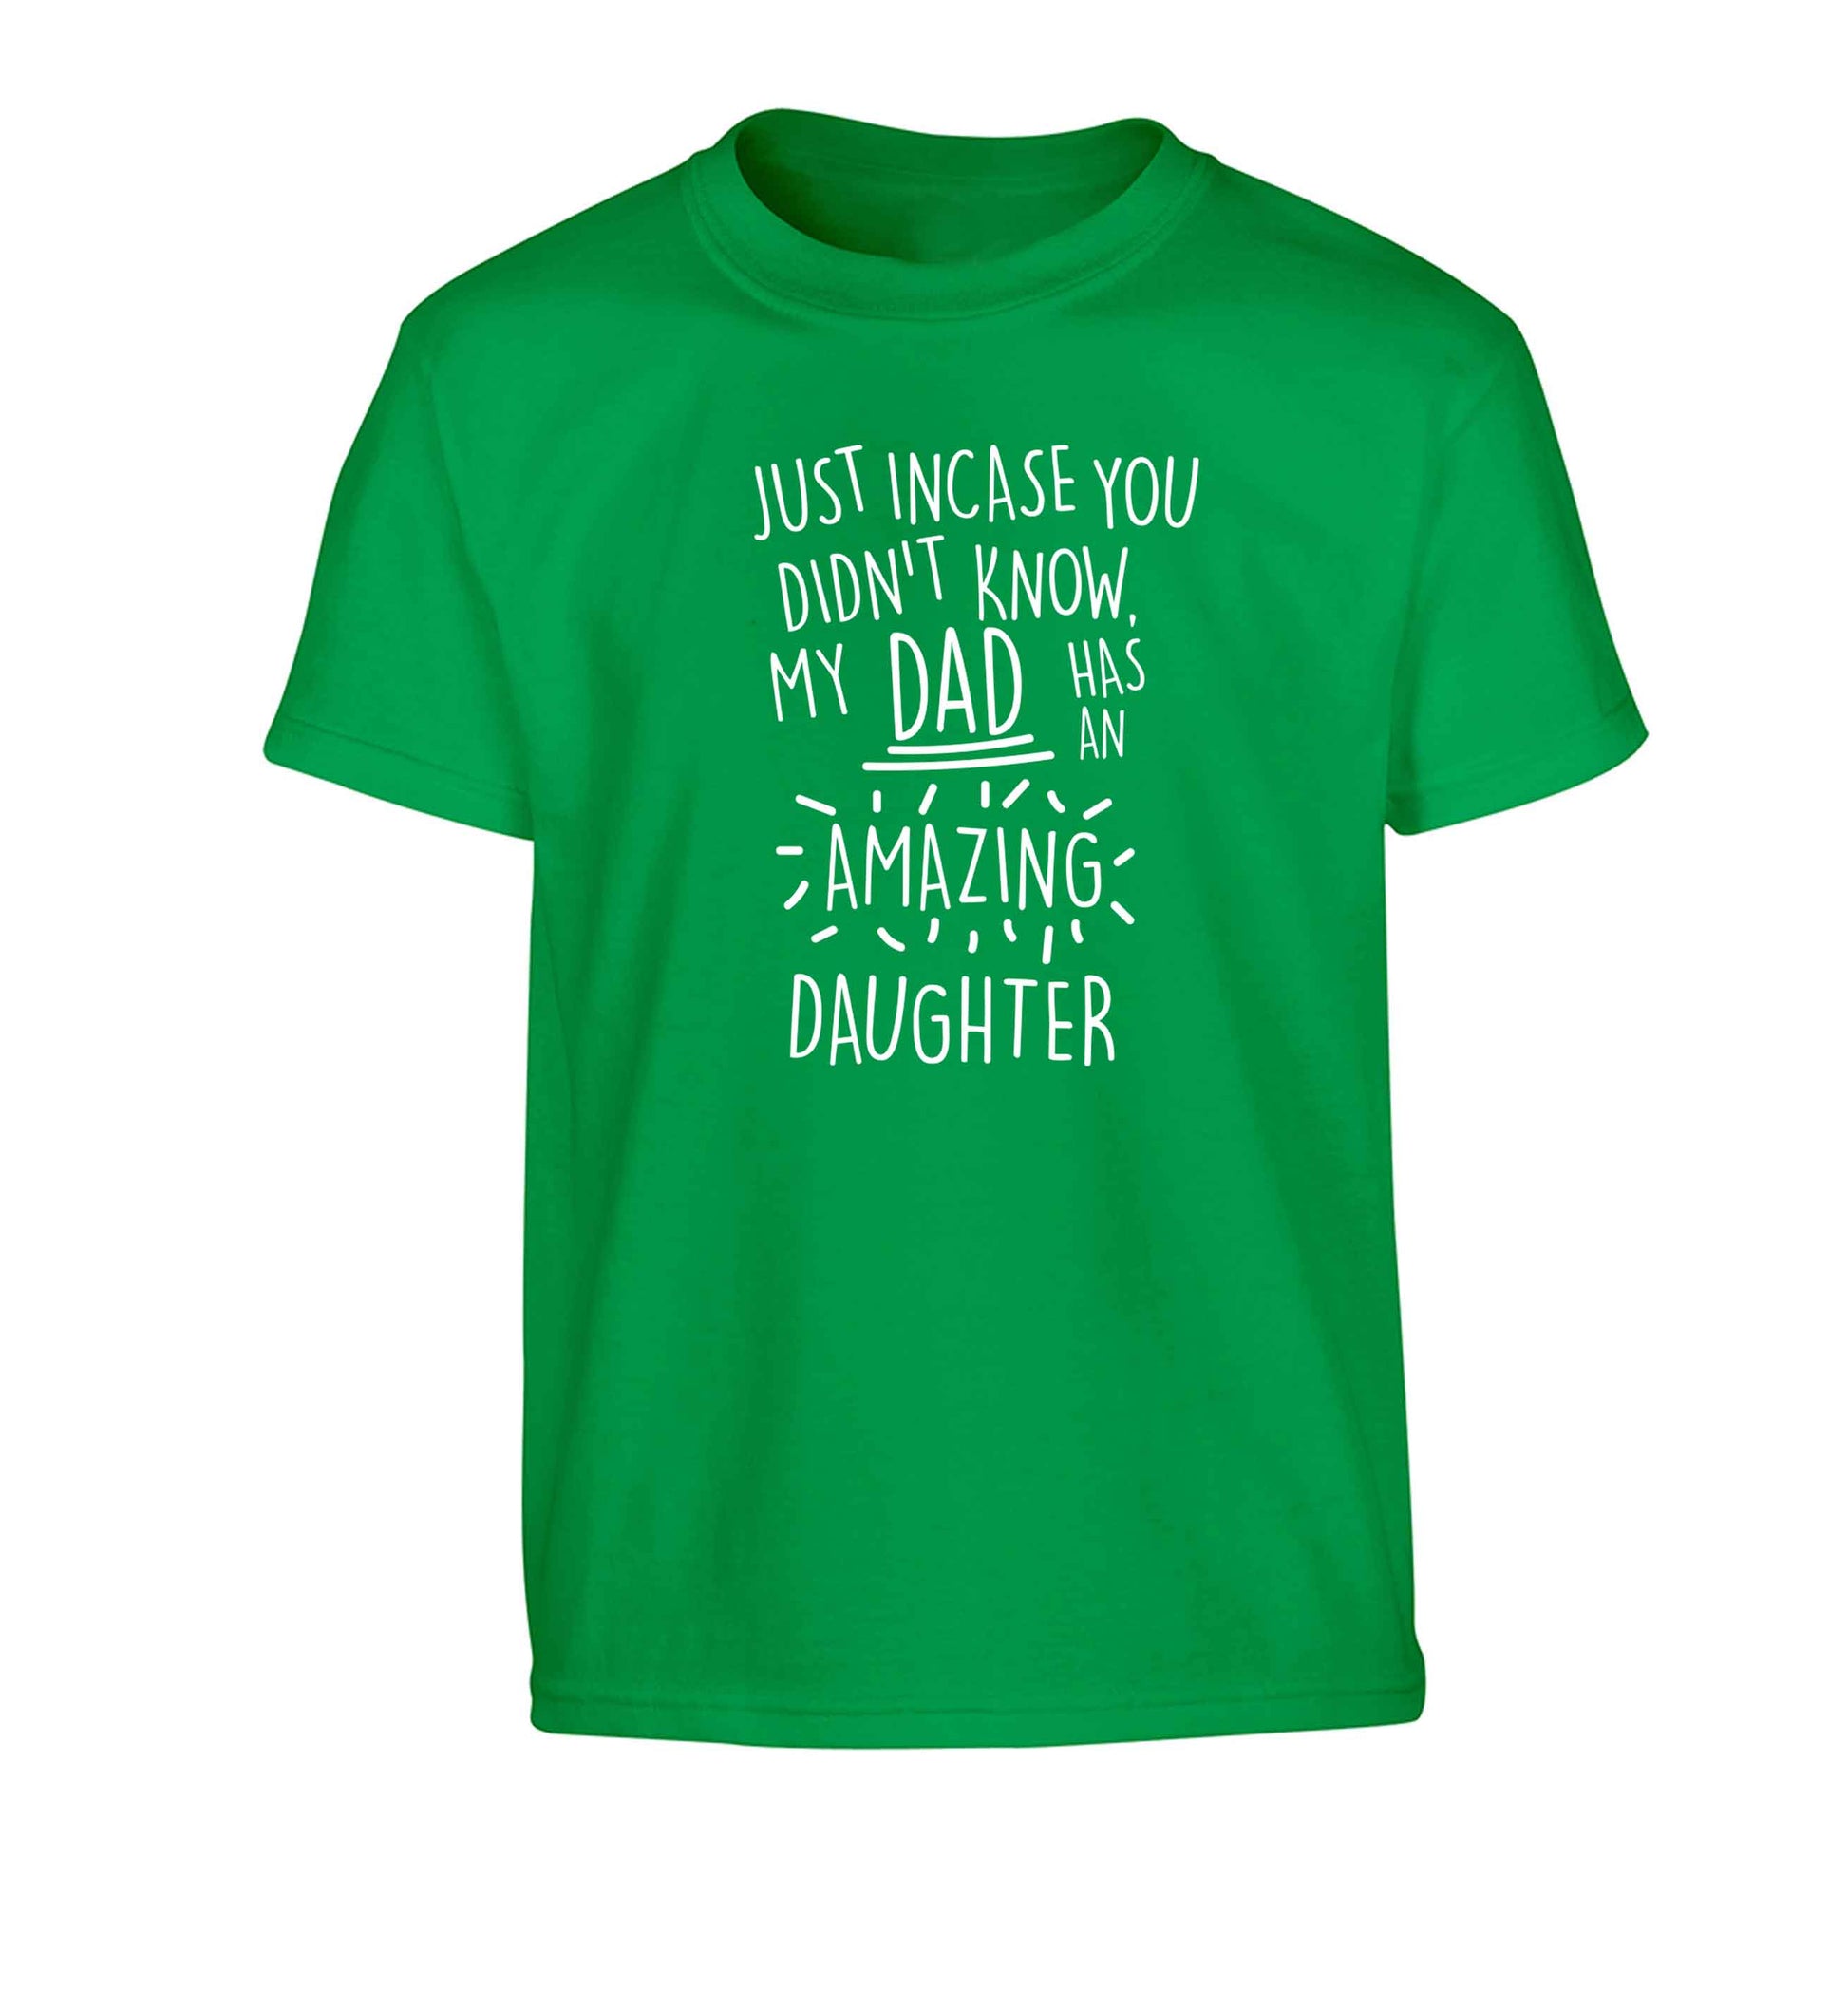 Just incase you didn't know my dad has an amazing daughter Children's green Tshirt 12-13 Years